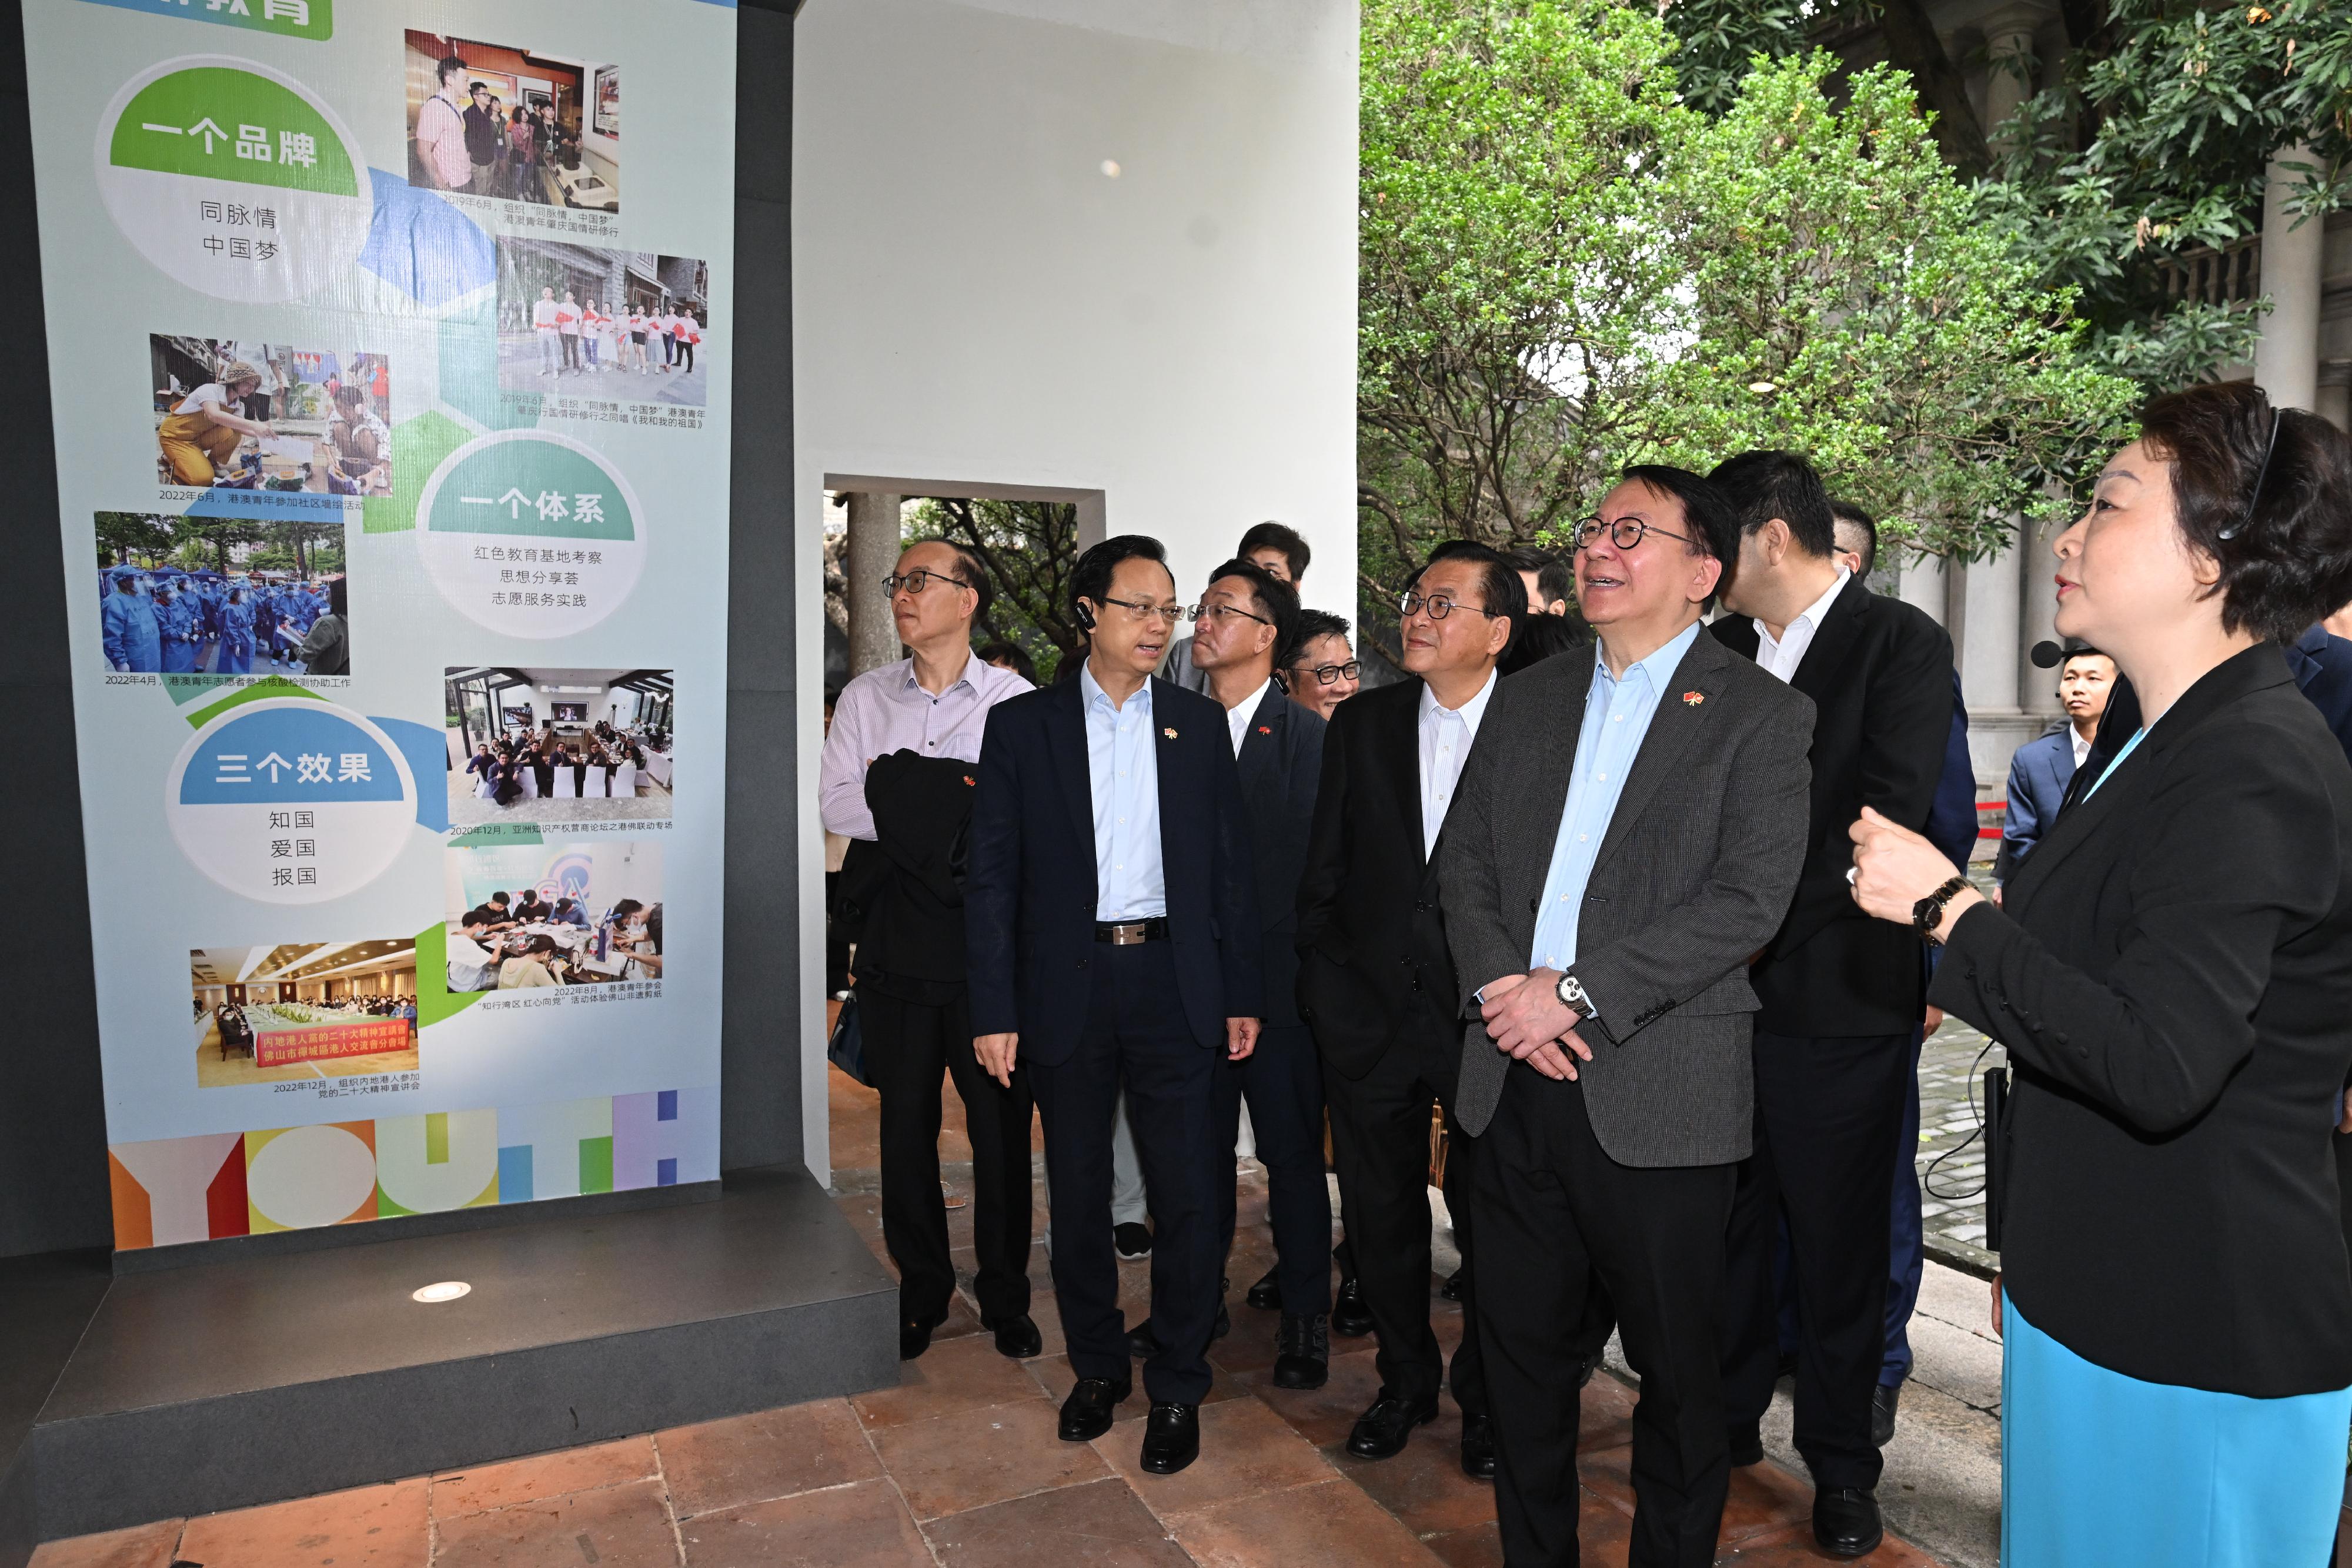 The delegation of the Hong Kong Special Administrative Region Government and the Legislative Council (LegCo) led by the Chief Executive, Mr John Lee, conducted their third-day visit in the Guangdong-Hong Kong-Macao Greater Bay Area today (April 23). Photo shows the Chief Secretary for Administration, Mr Chan Kwok-ki (second right), and LegCo members visiting the Foshan Lingnan Tiandi to learn more about Foshan's policy of heritage conservation.